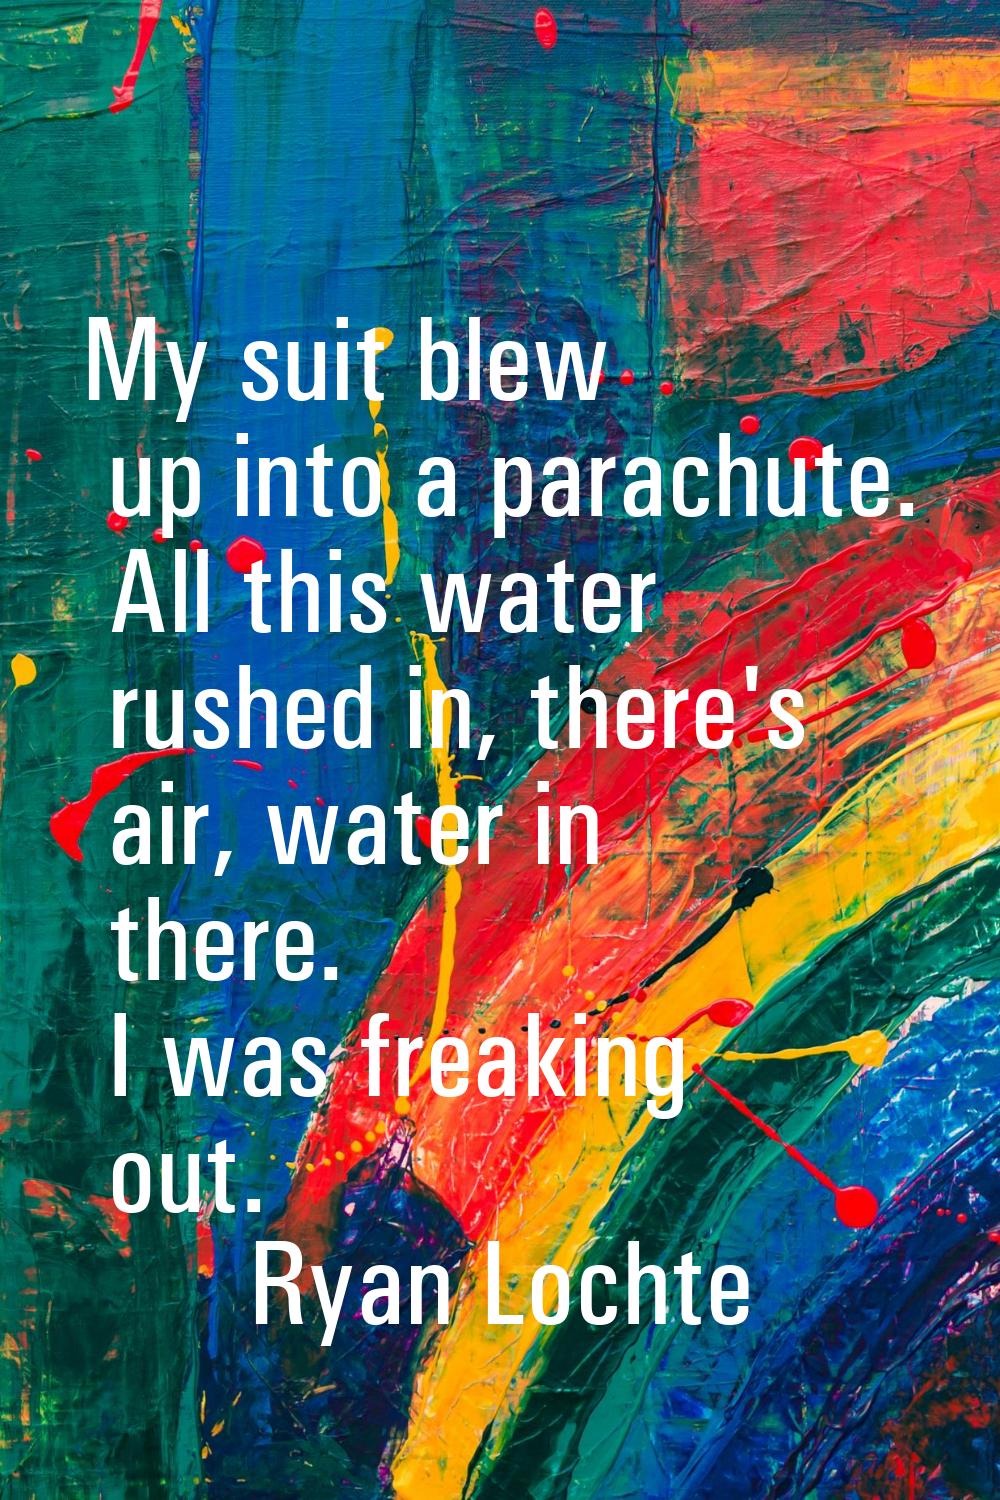 My suit blew up into a parachute. All this water rushed in, there's air, water in there. I was frea